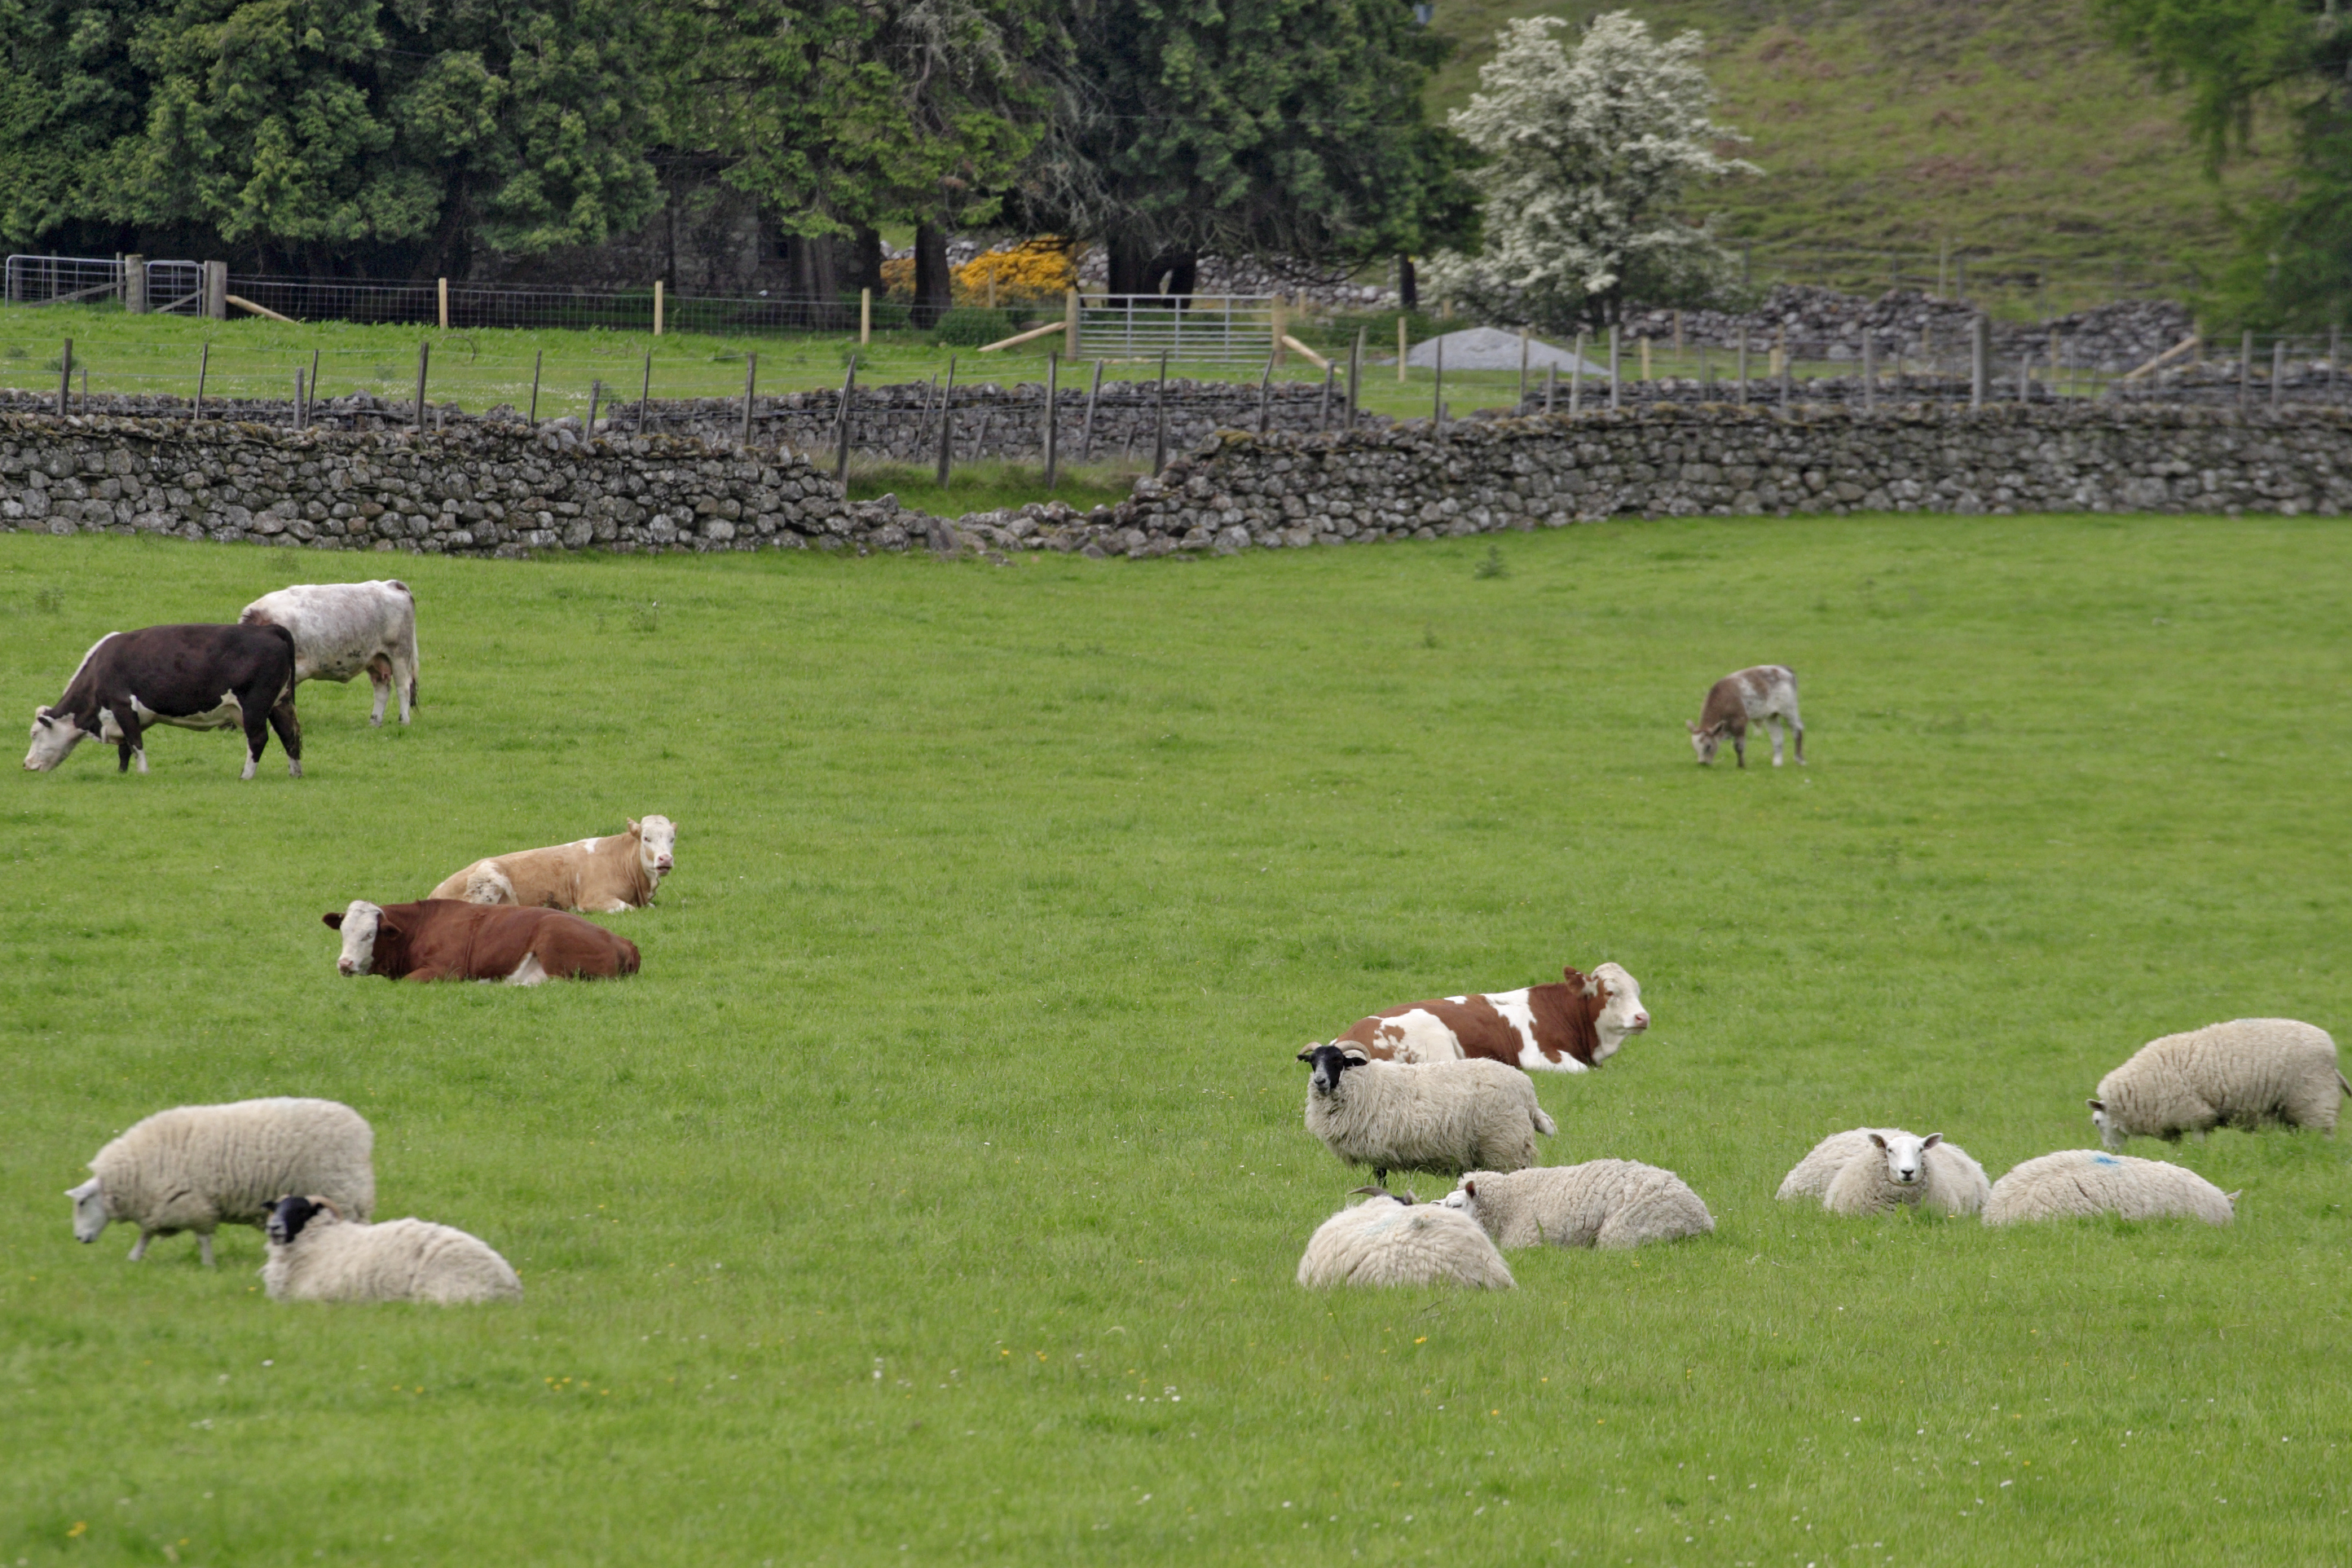 Cattle and sheep in a field